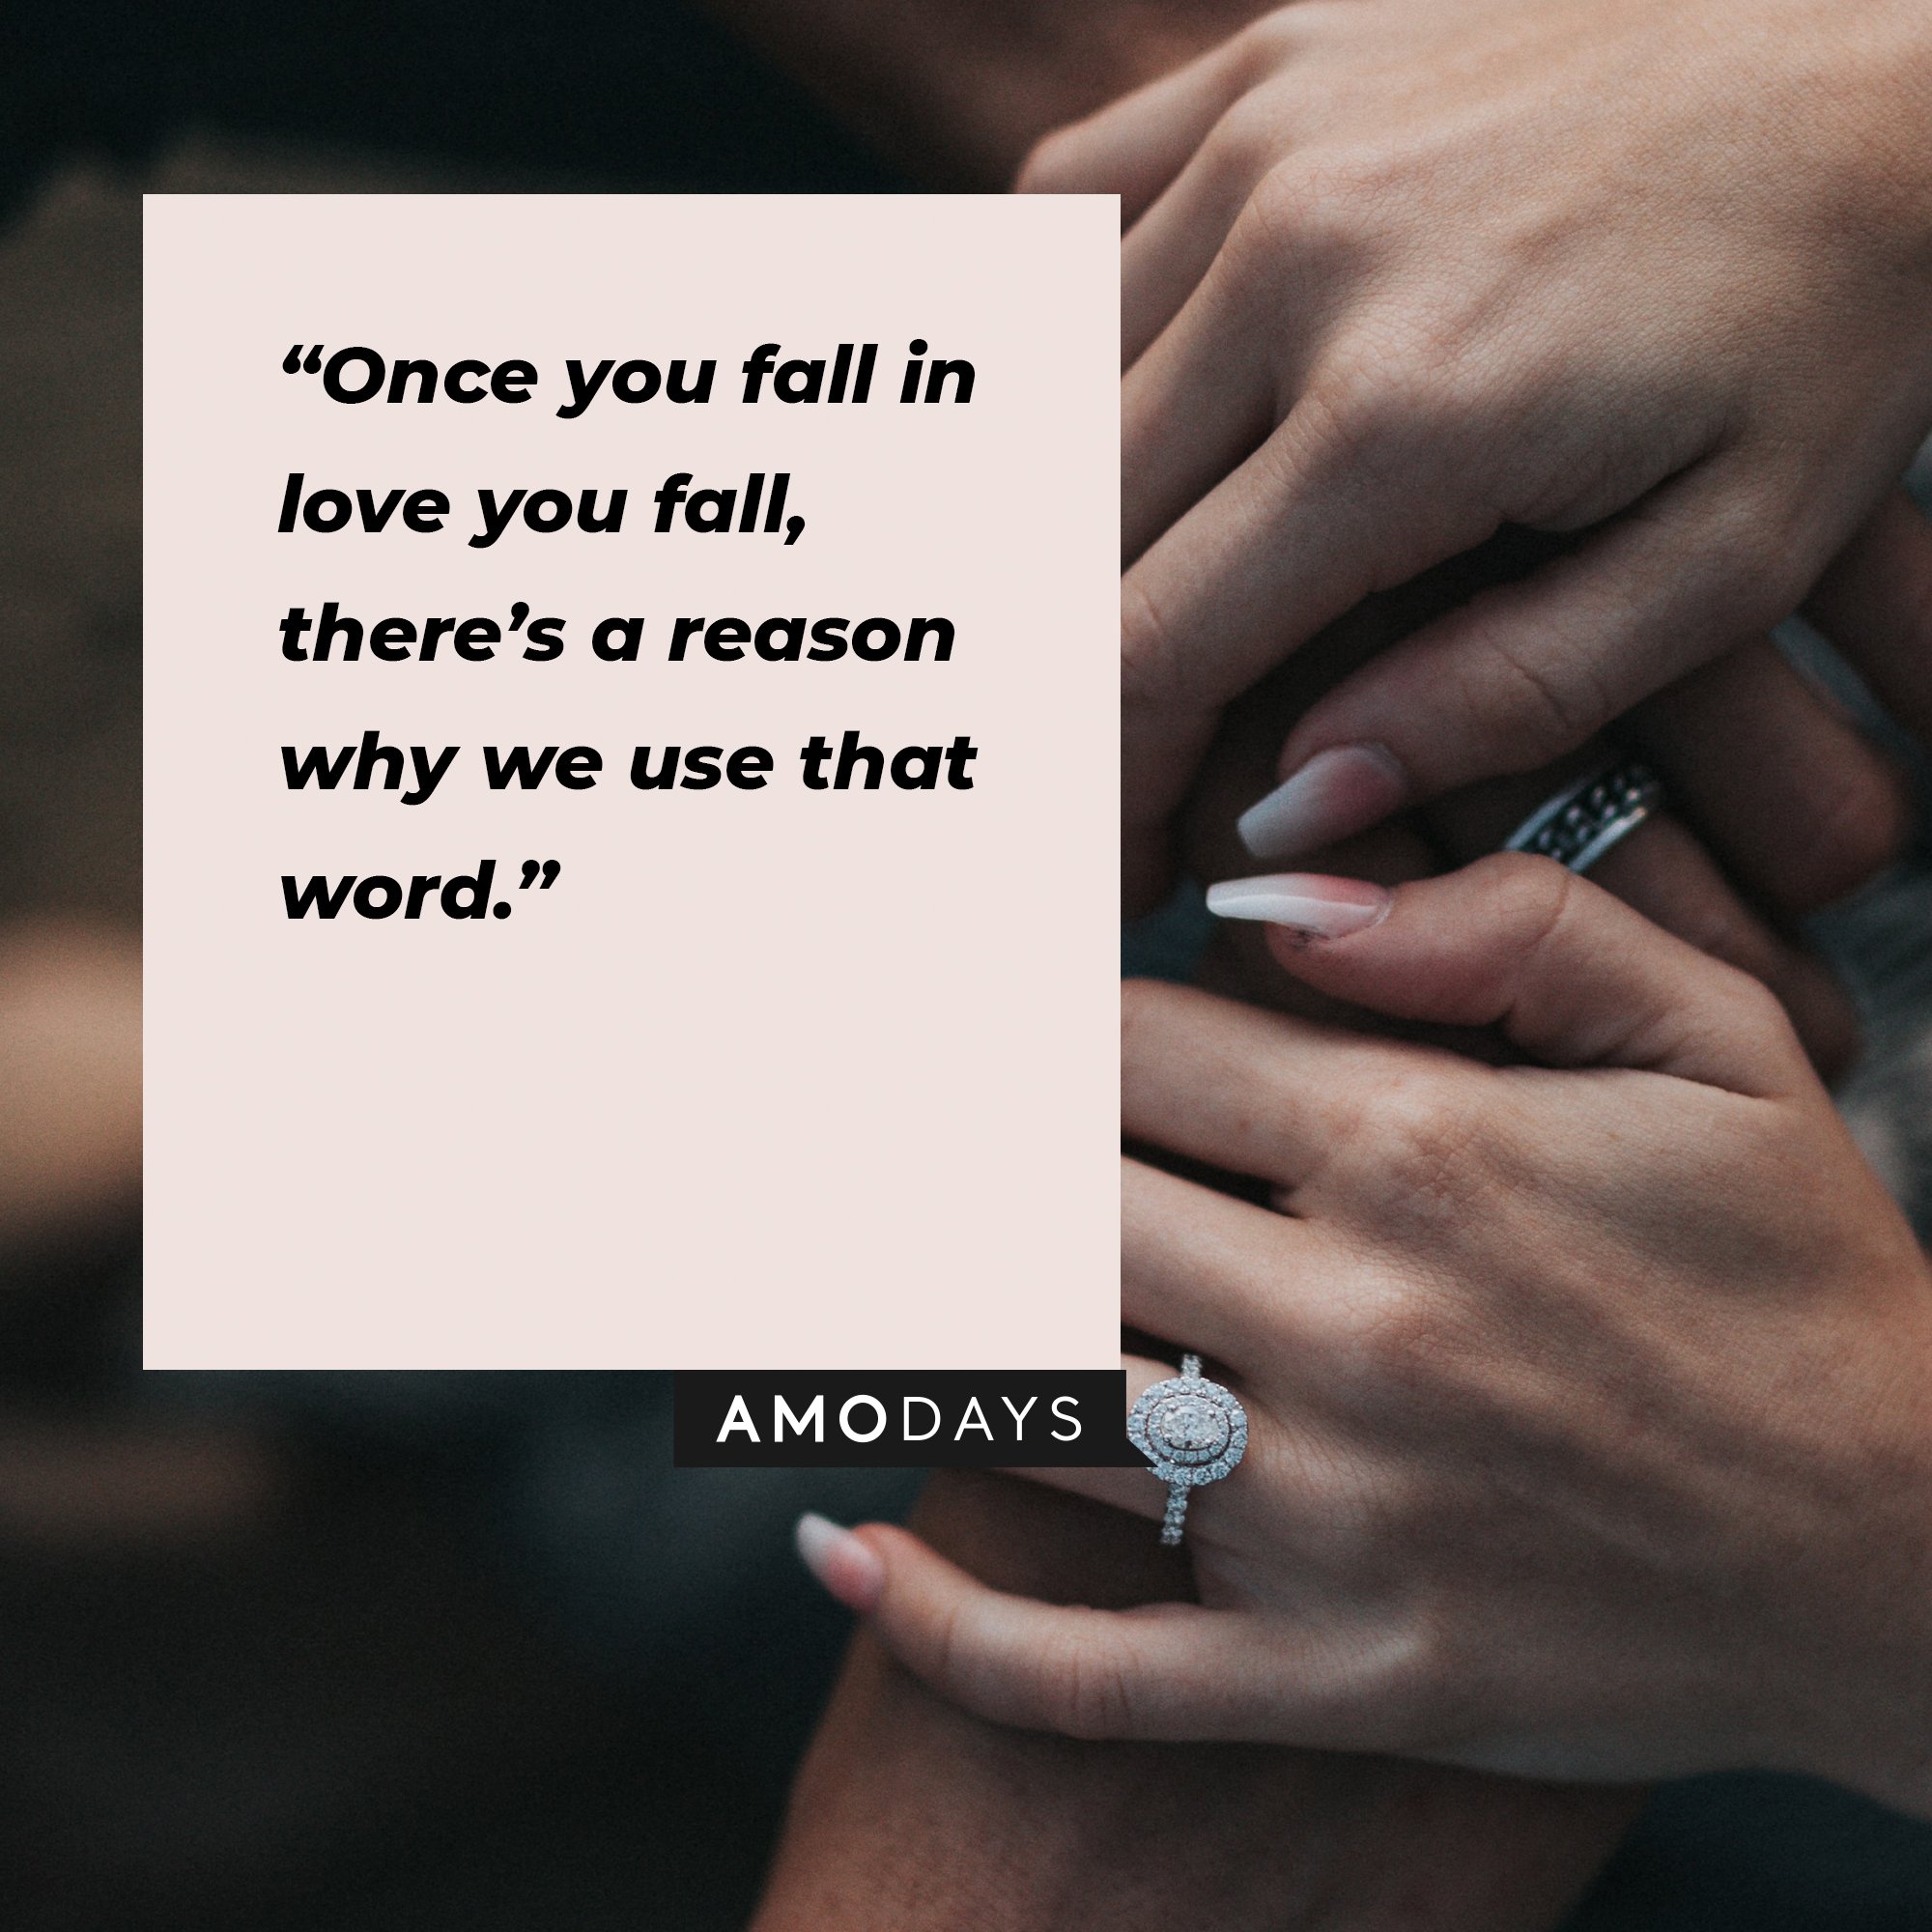 Juice WRLD’s quote: “Once you fall in love you fall, there’s a reason why we use that word.” | Image: AmoDays